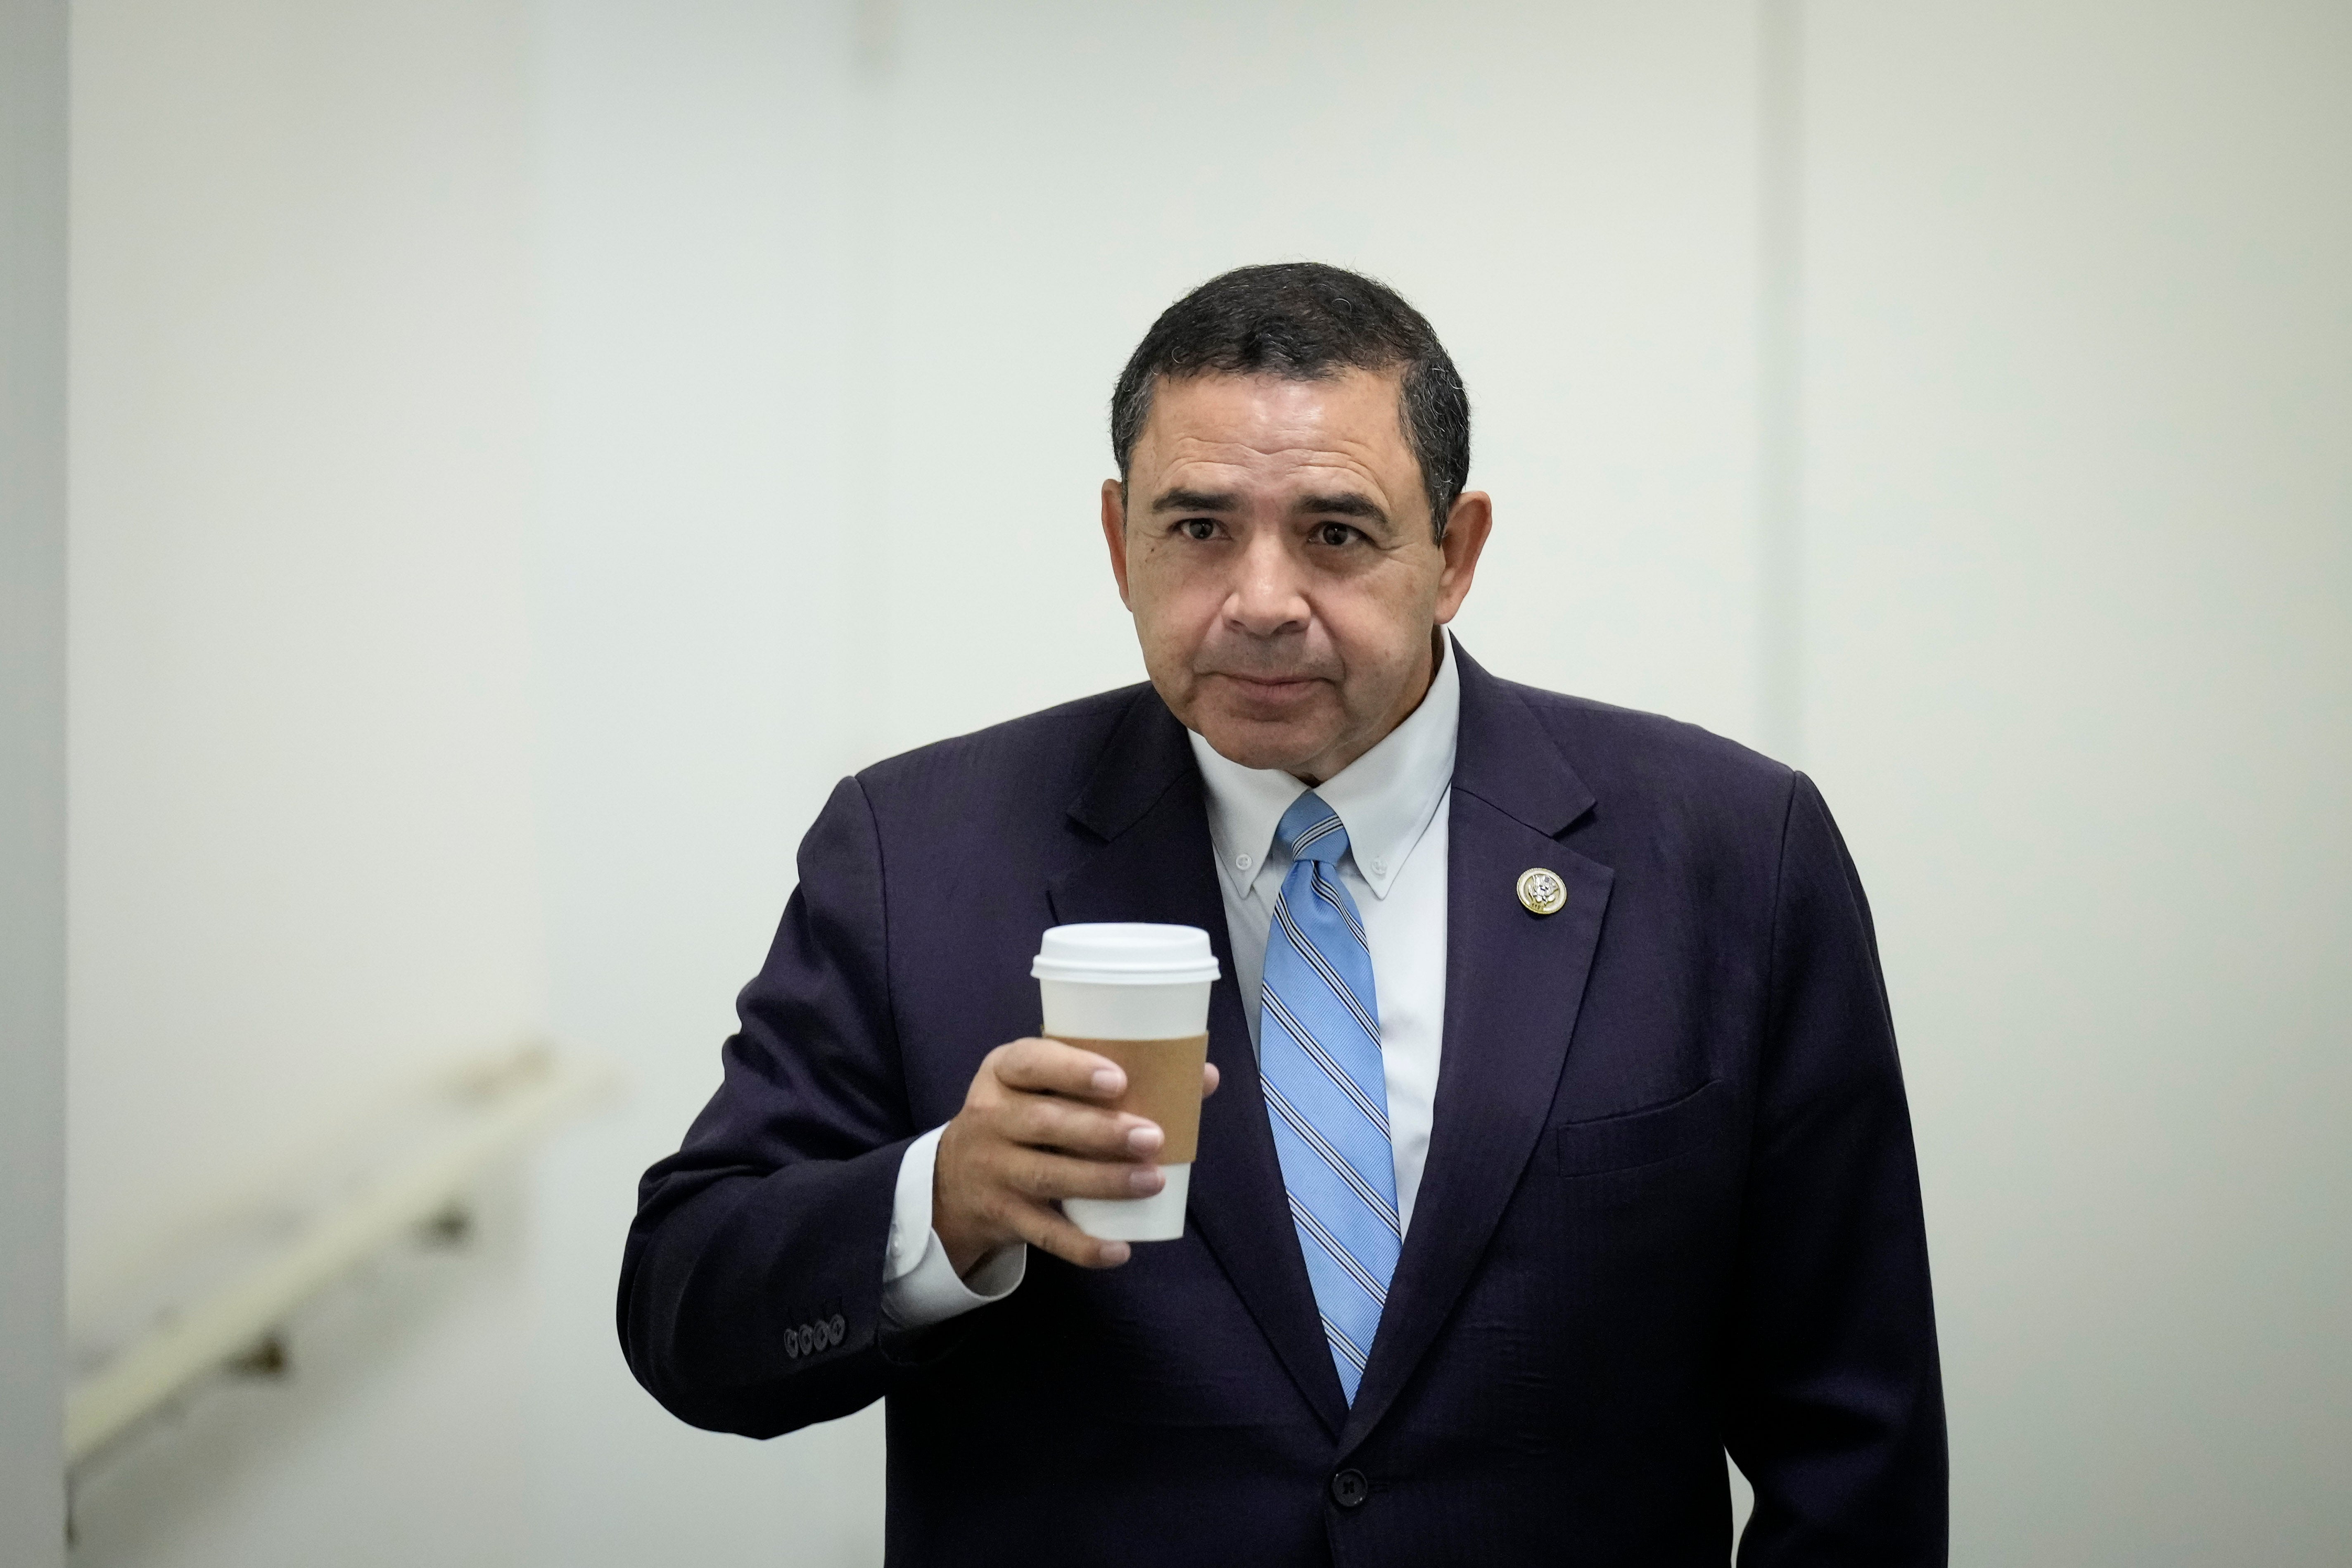 Henry Cuellar is accused of accepting nearly $600,000 in bribes